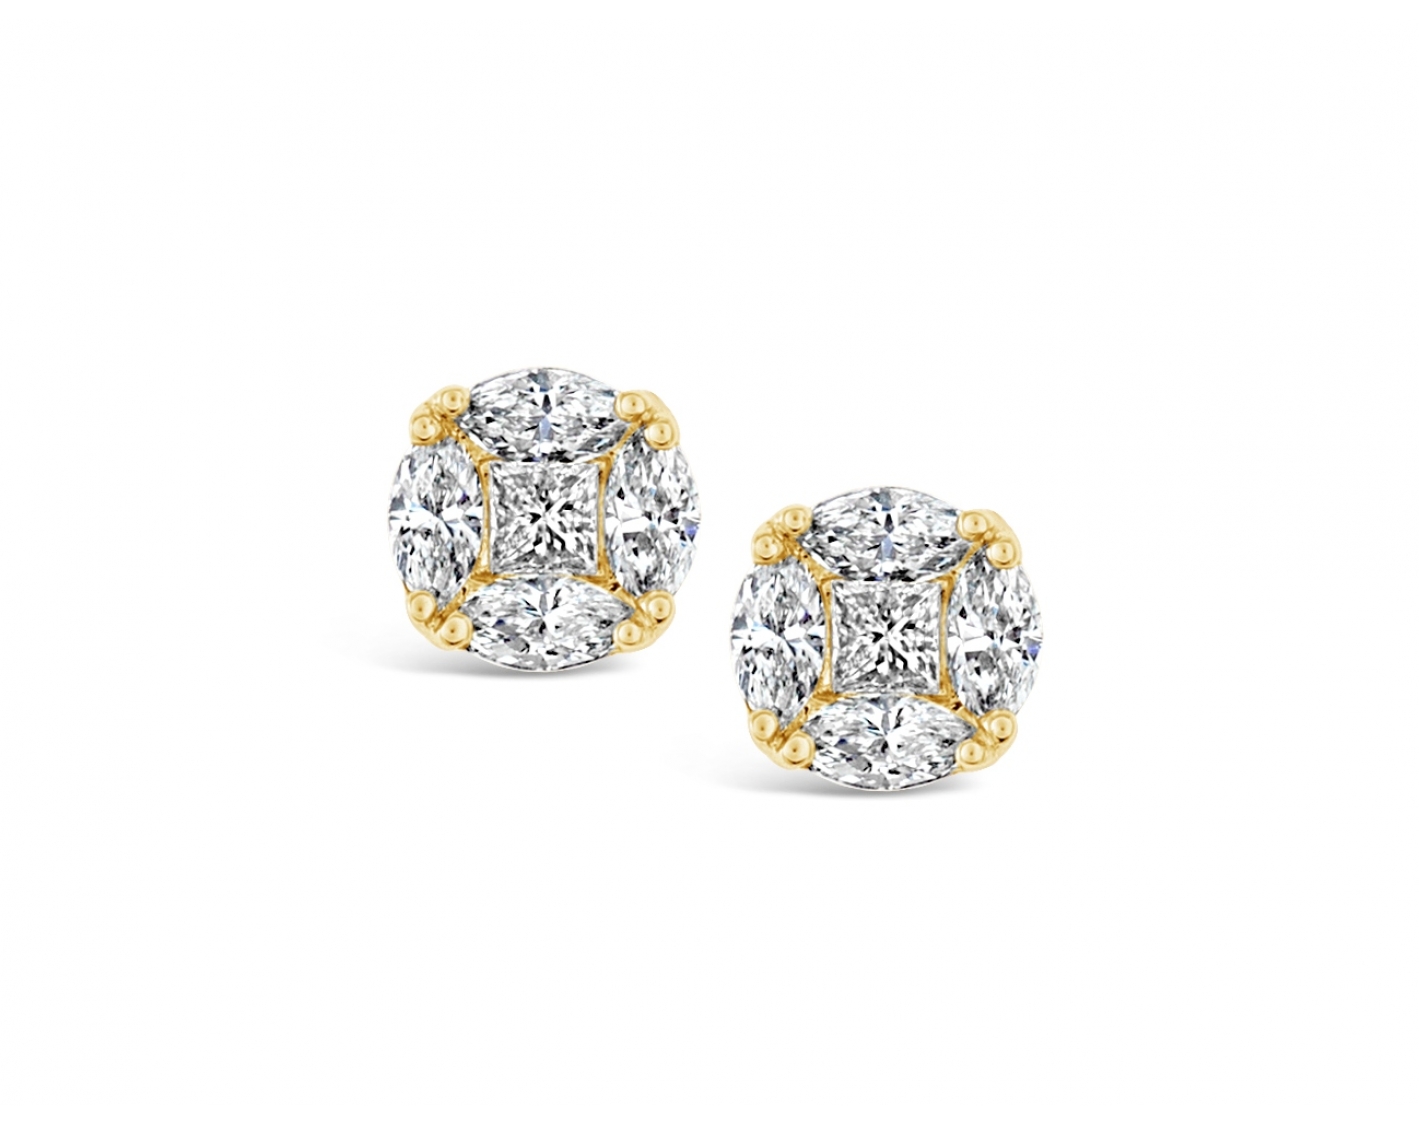 18k yellow gold illusion set stud earrings with princess & marquises diamonds Photos & images